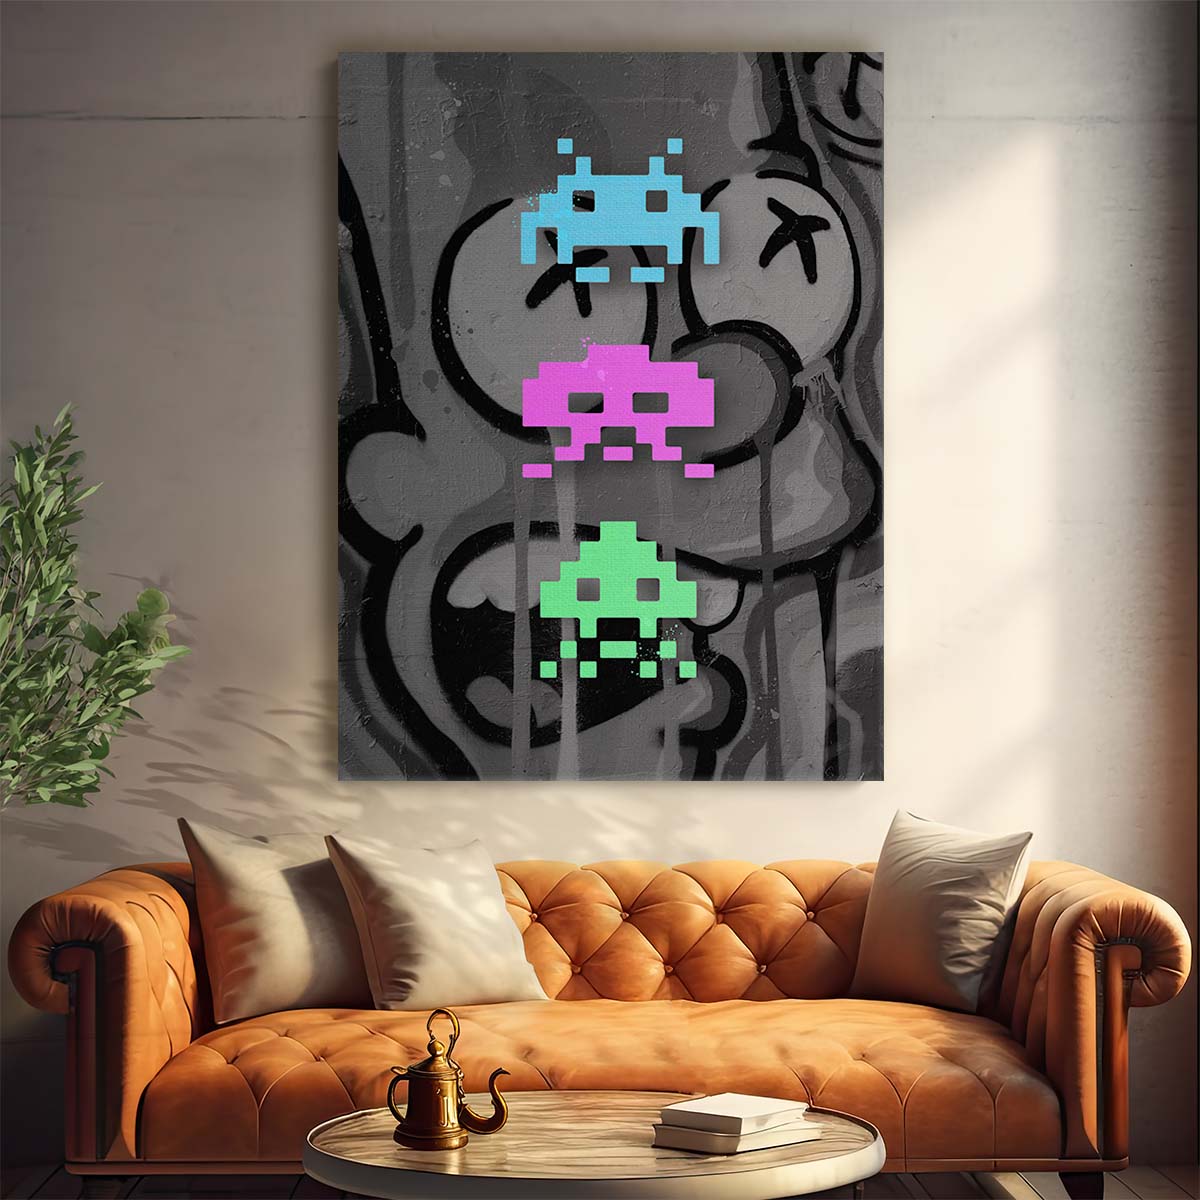 Space Invaders Video Game Wall Art by Luxuriance Designs. Made in USA.